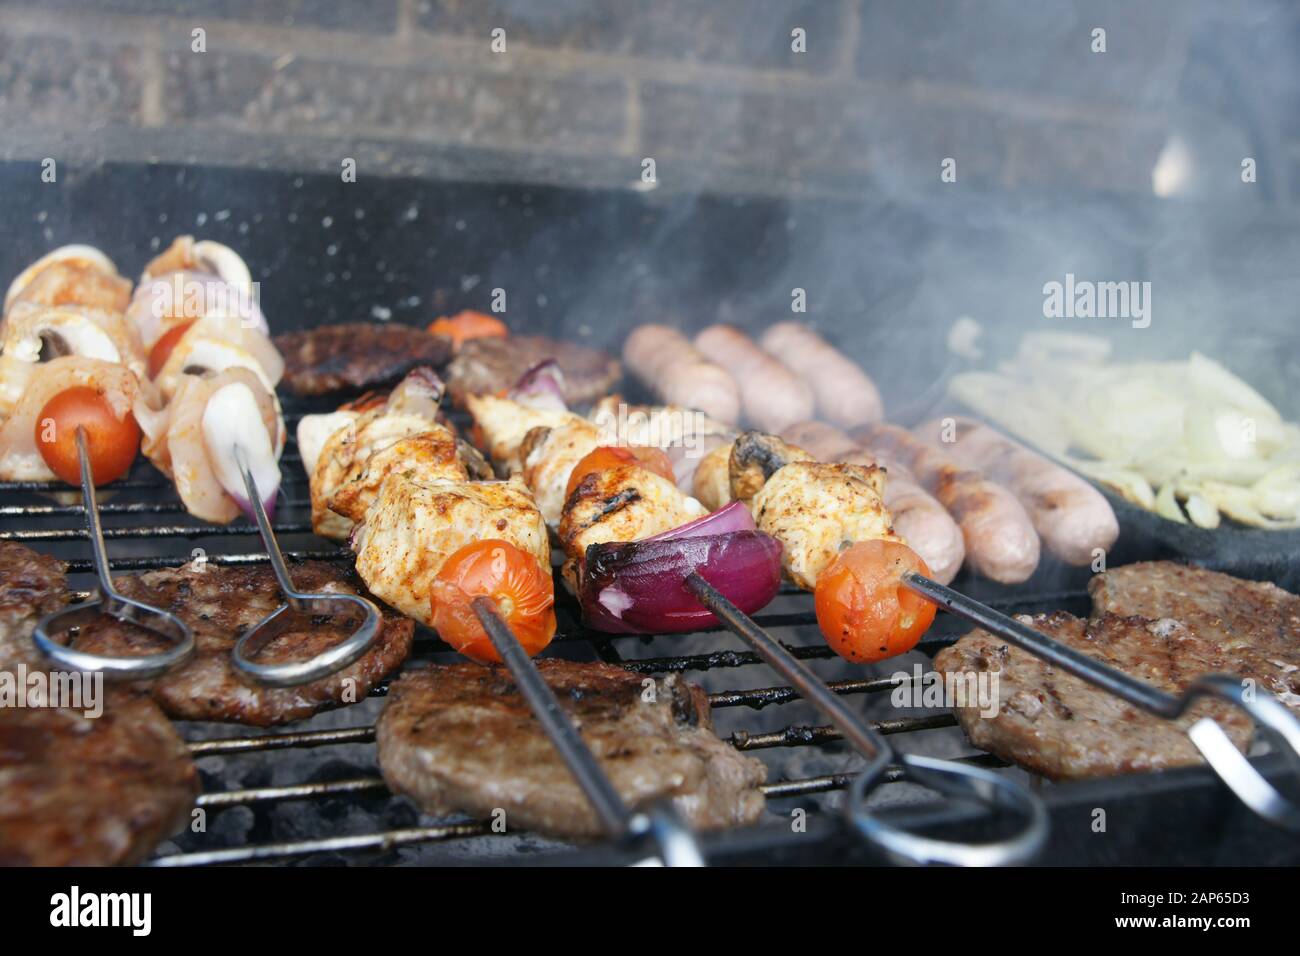 Bar B Q High Resolution Stock Photography and Images - Alamy